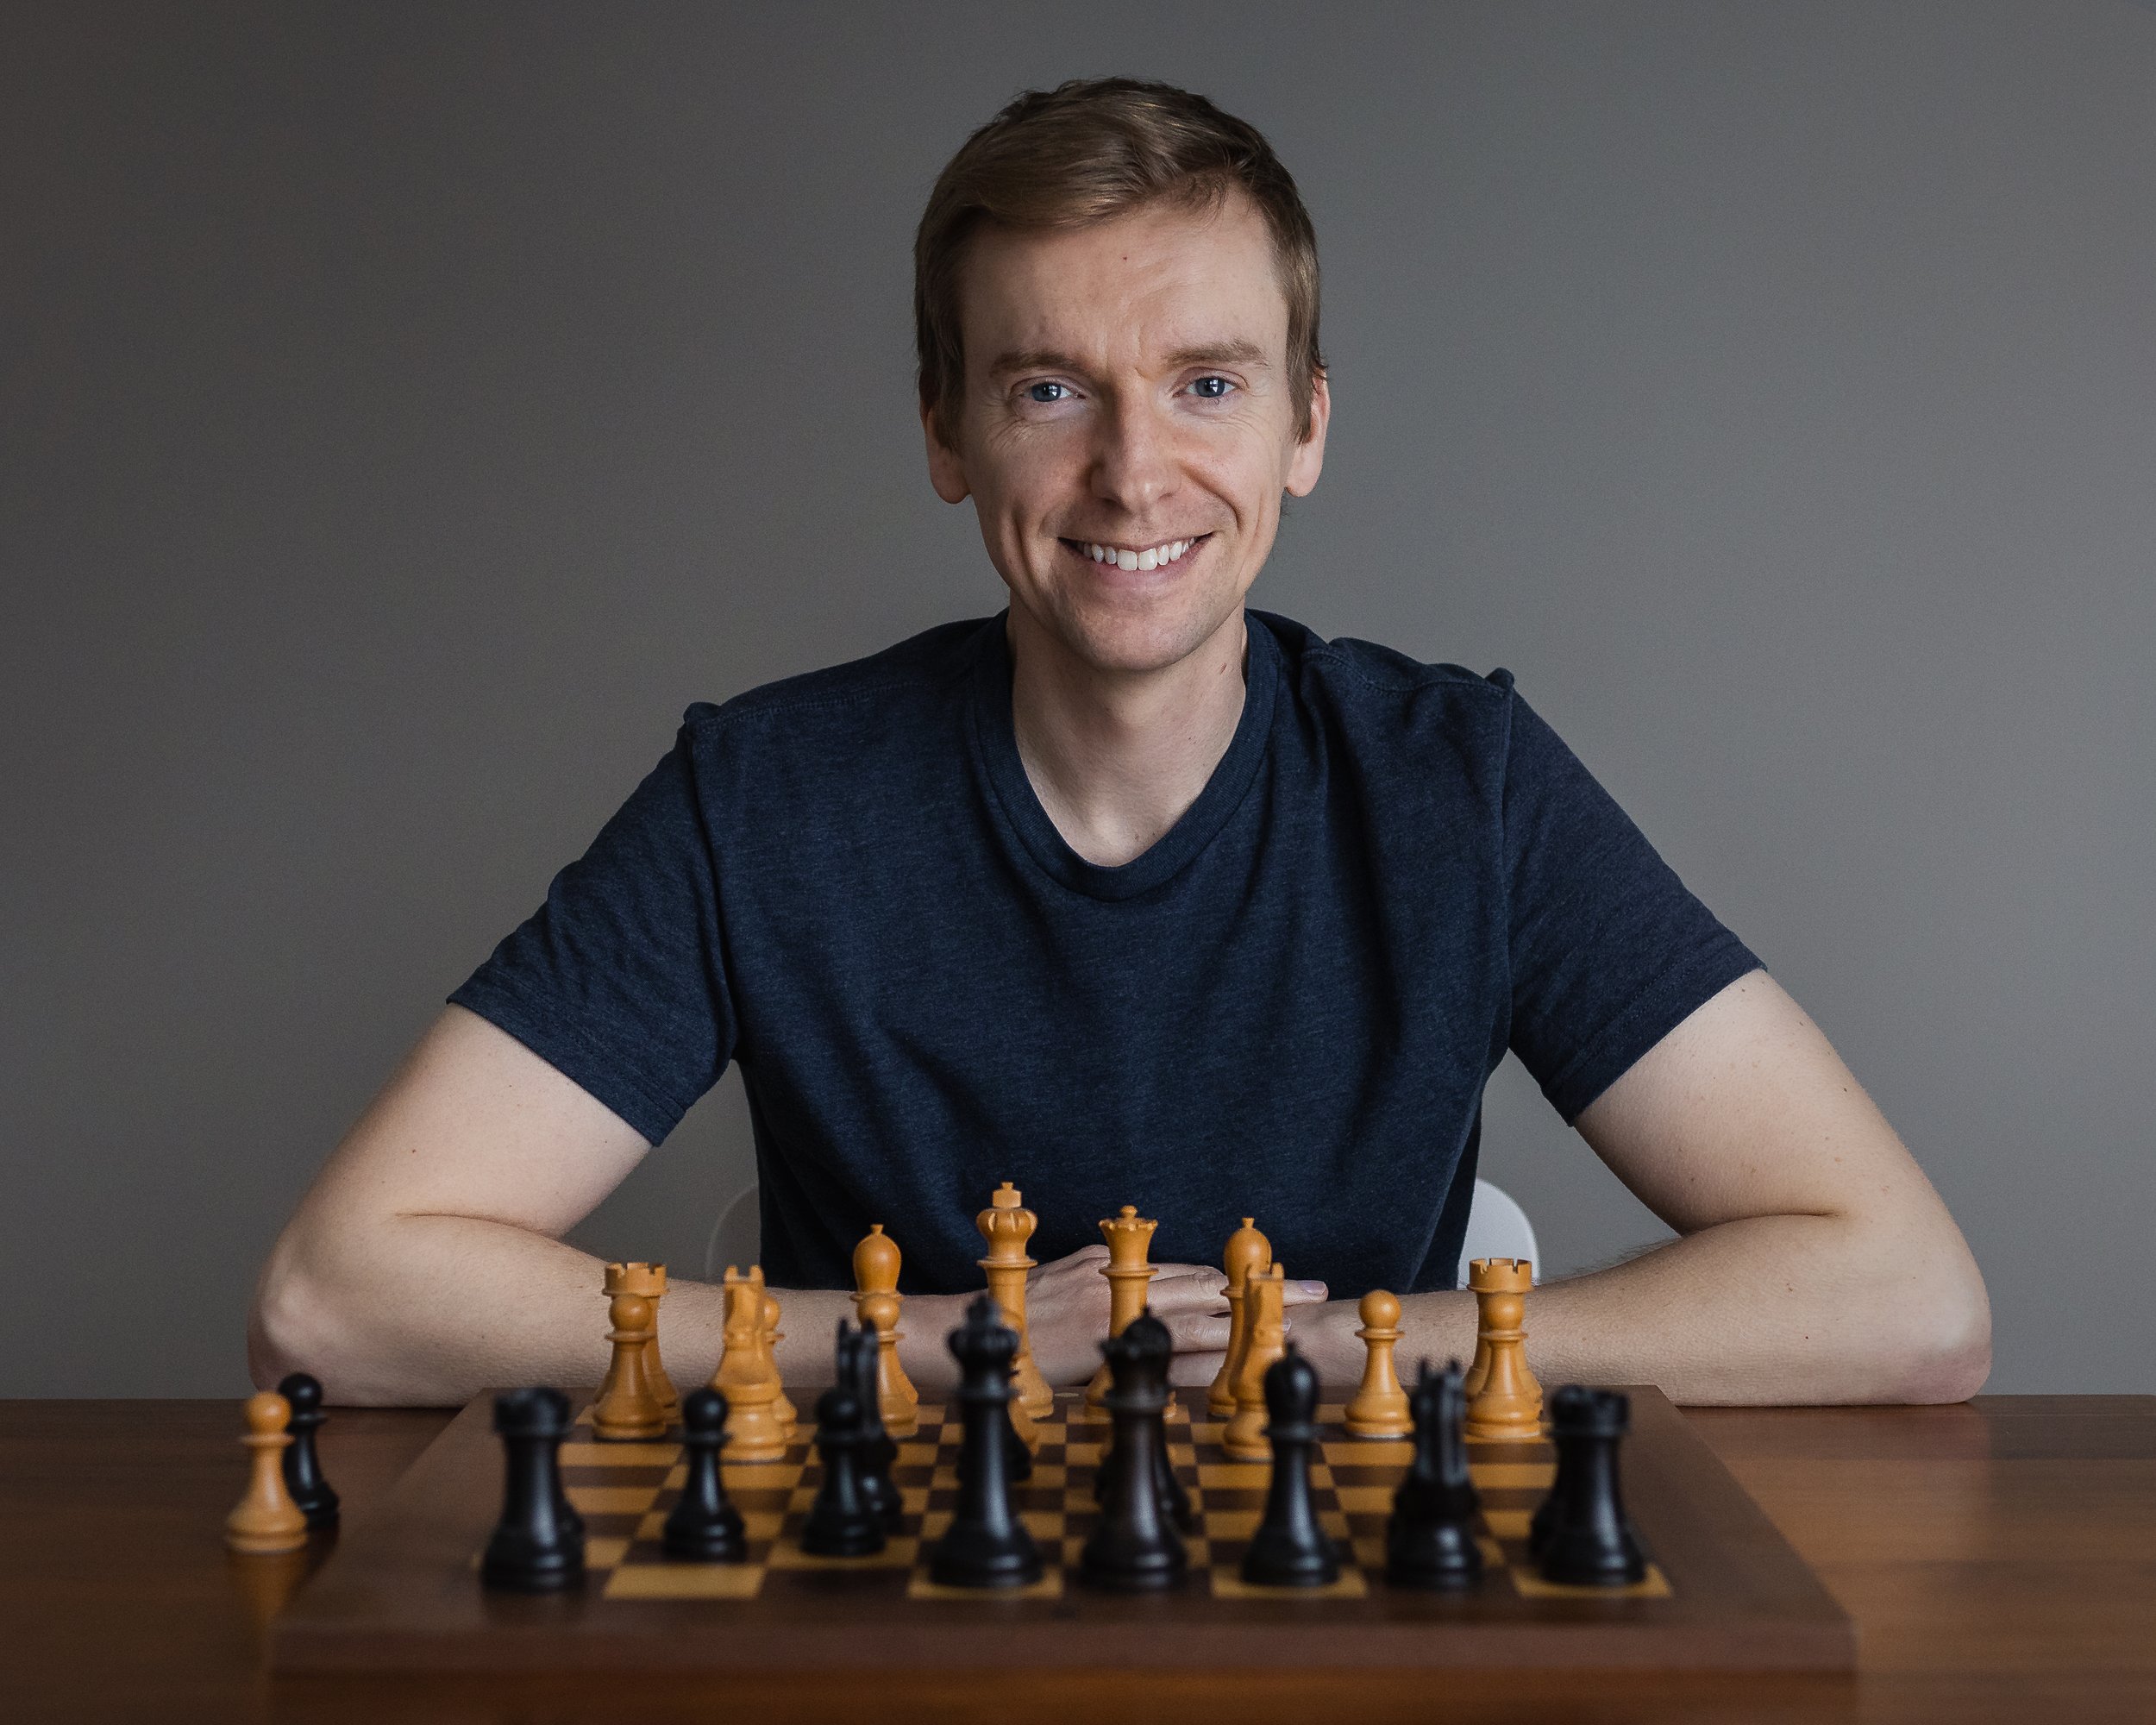 On Rating Deflation in Modern Chess